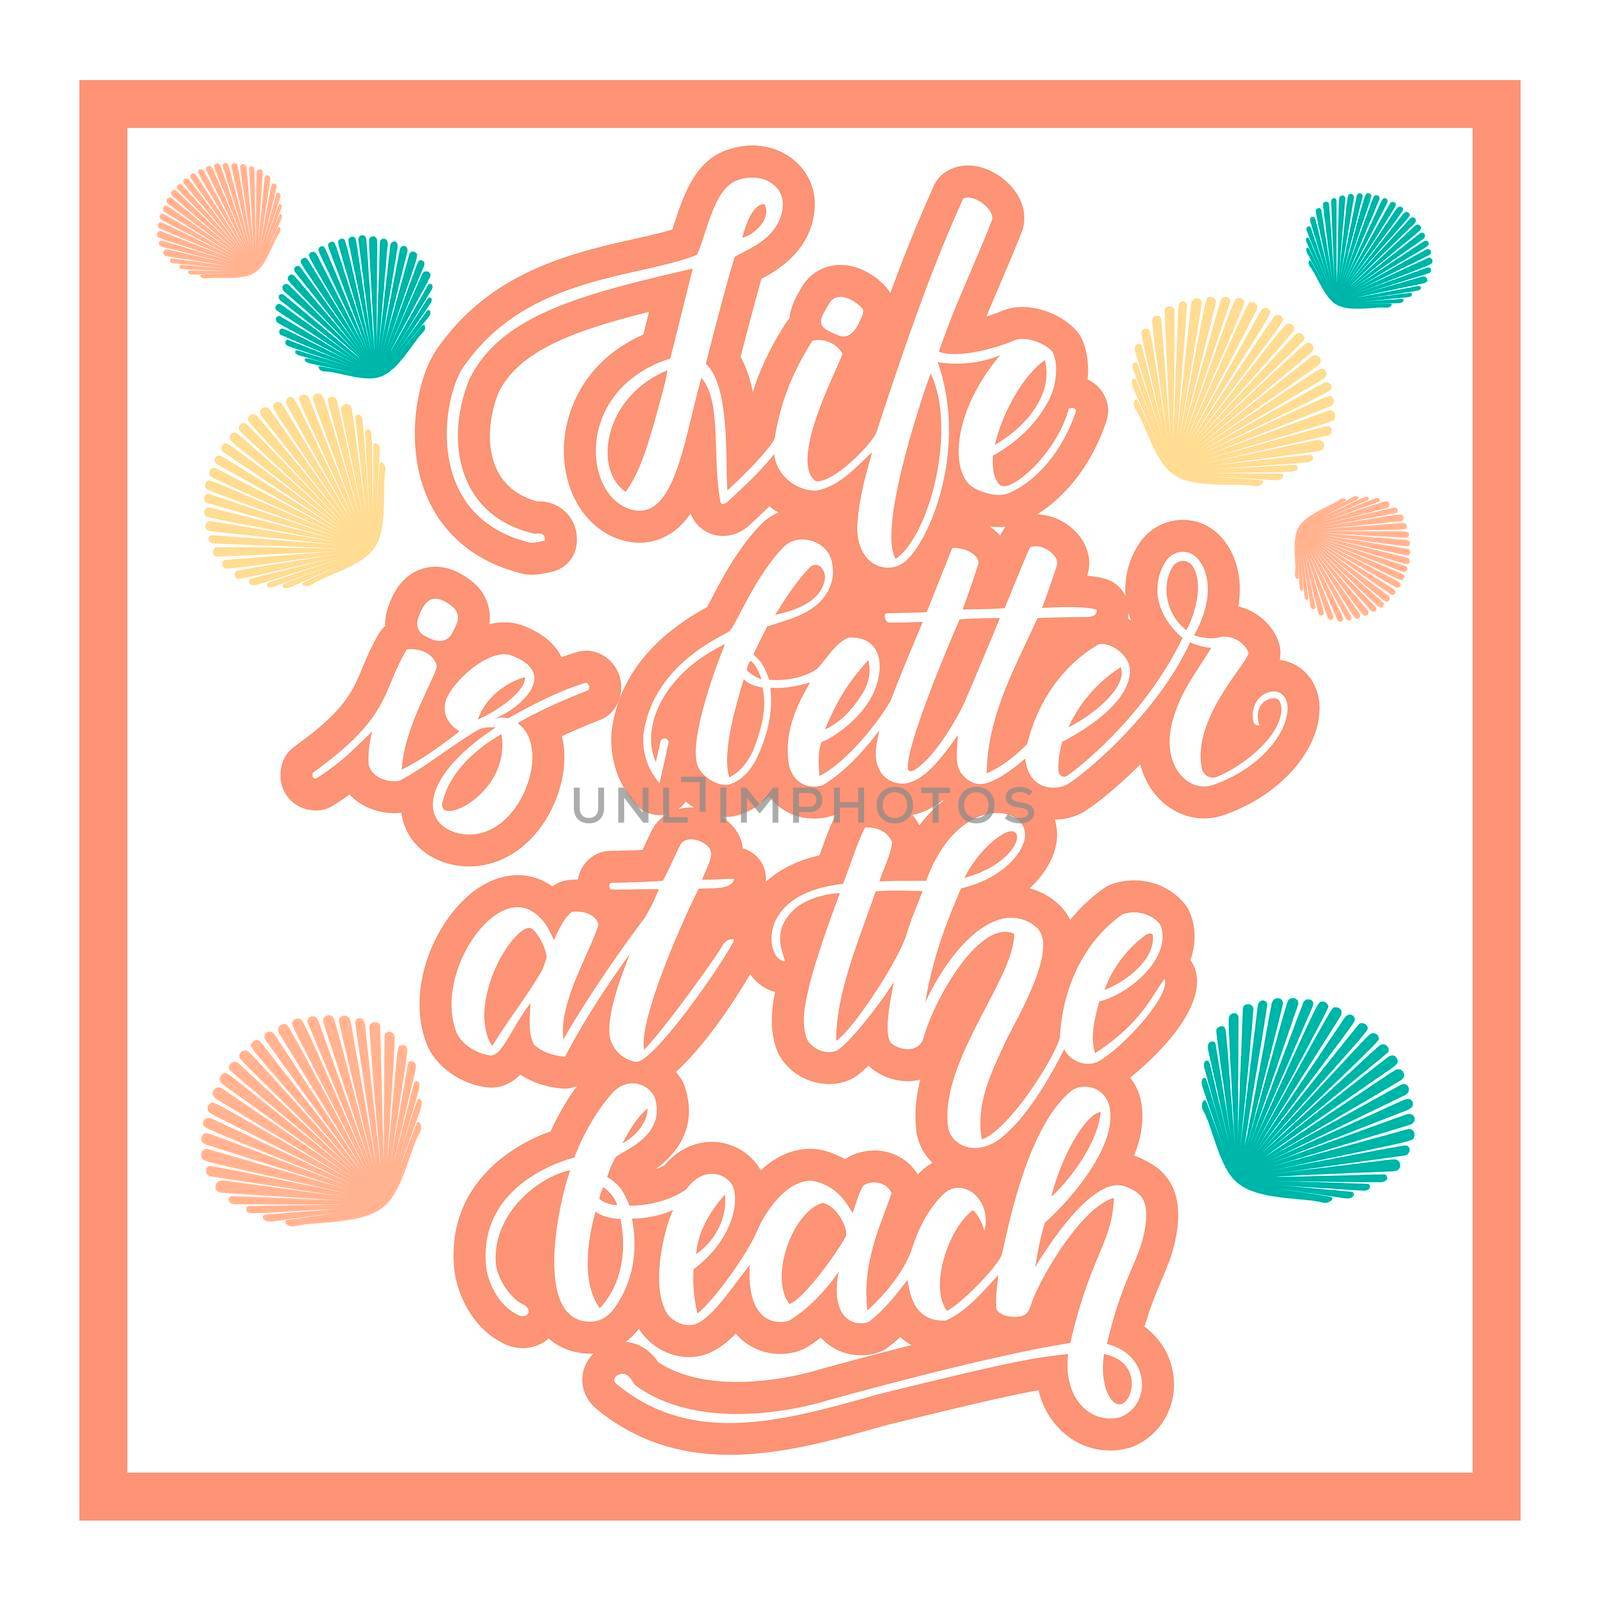 Life is better at the beach. Handwritten lettering on white background. illustration.